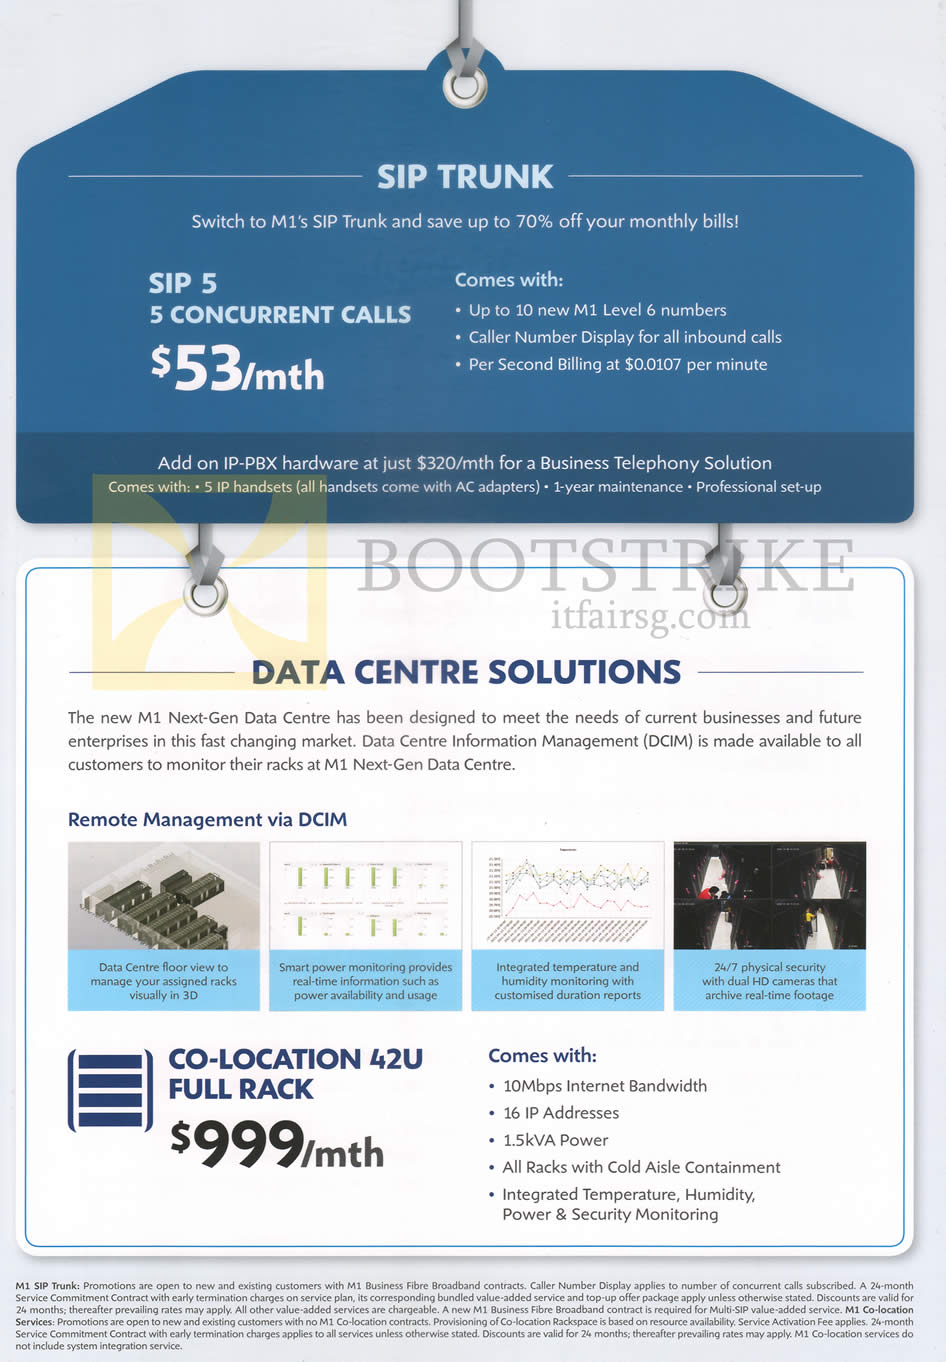 PC SHOW 2016 price list image brochure of M1 Business SIP Trunk 53.00, Data Centre Solutions Co-Location 42U Full Rack 999